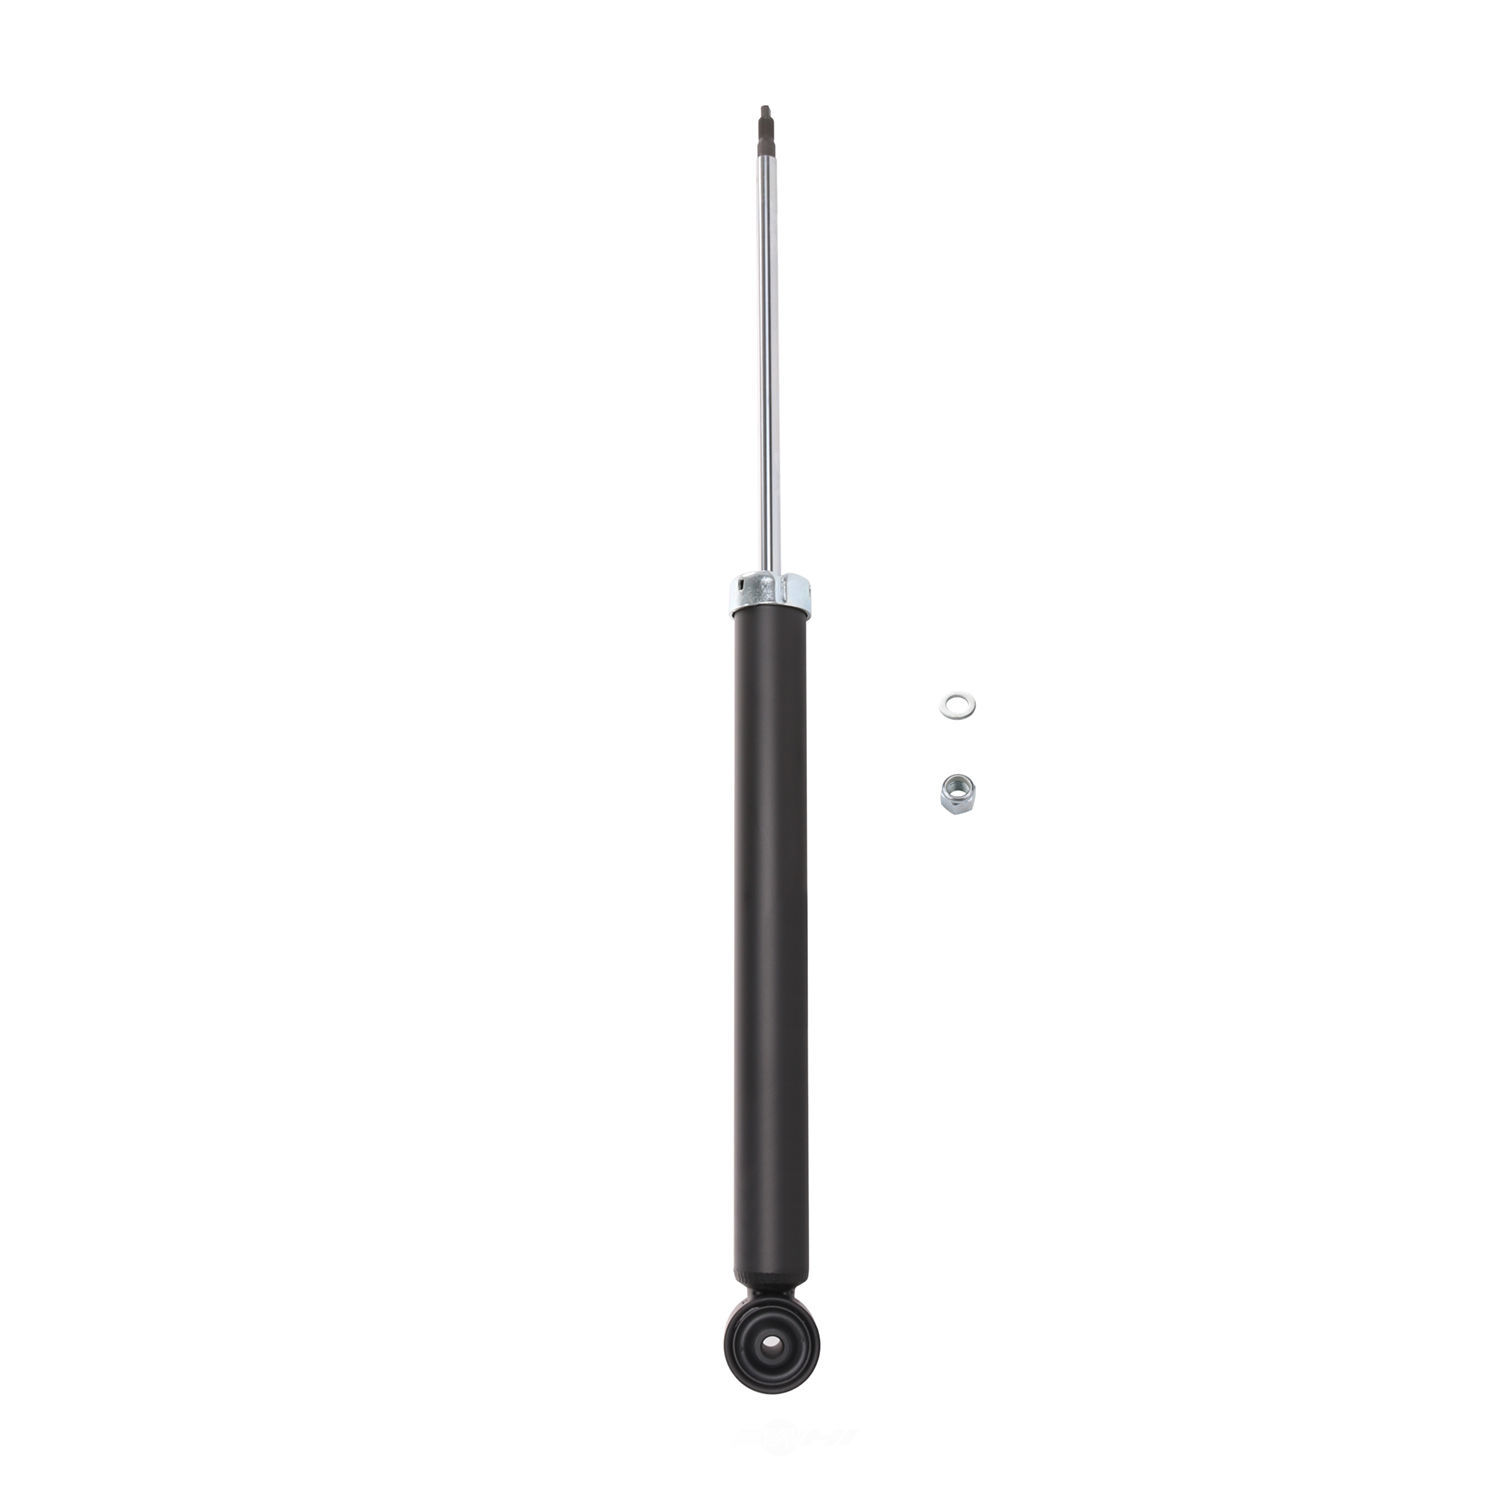 PERFORMANCE RIDE TECHNOLOGY BY ADD - Suspension Strut - P6T 372221